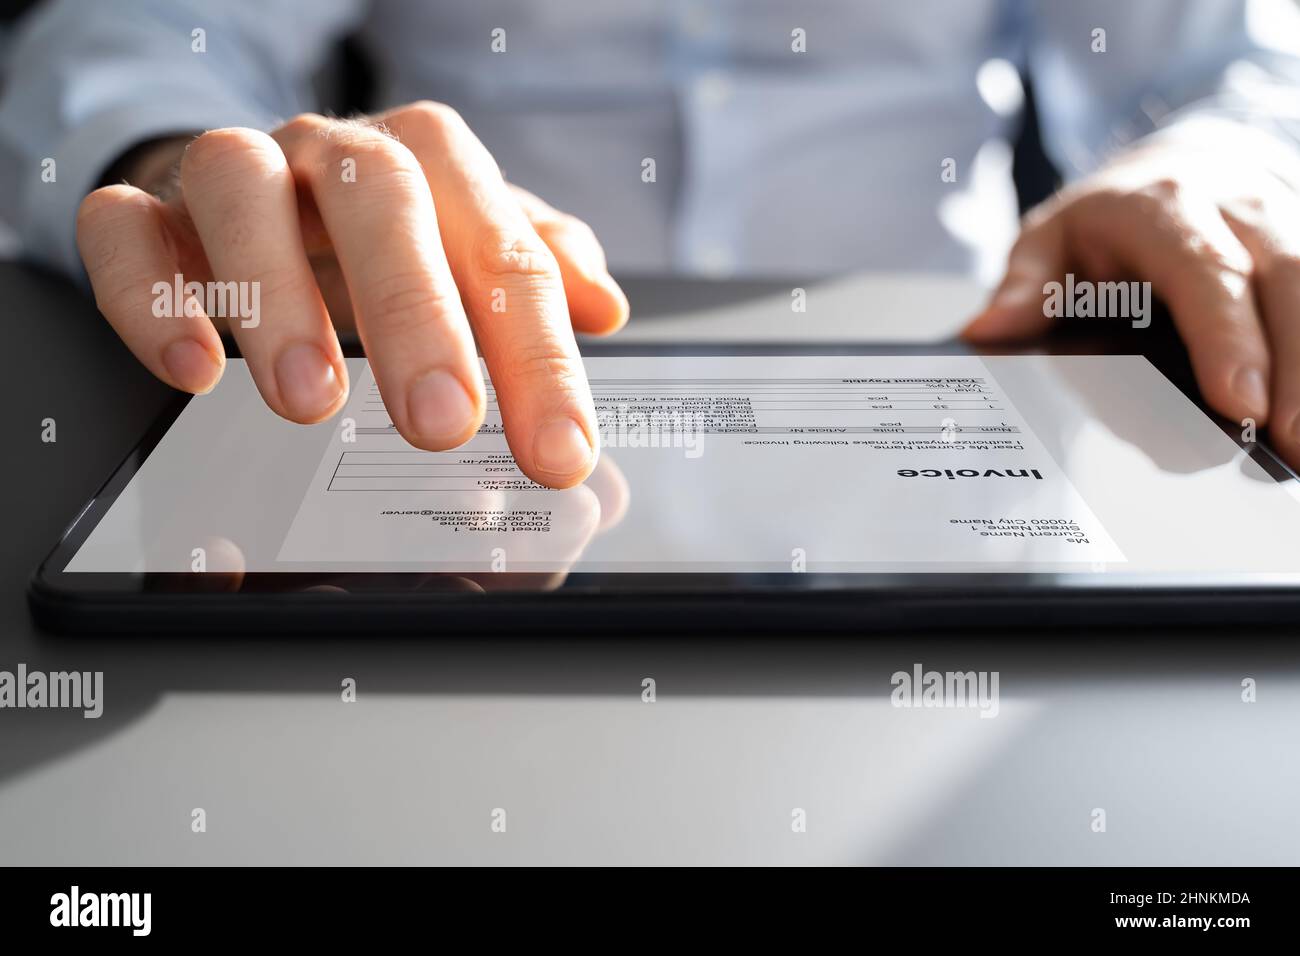 Corporate E Invoice Electronic Accounting Software auf Tablet Stockfoto